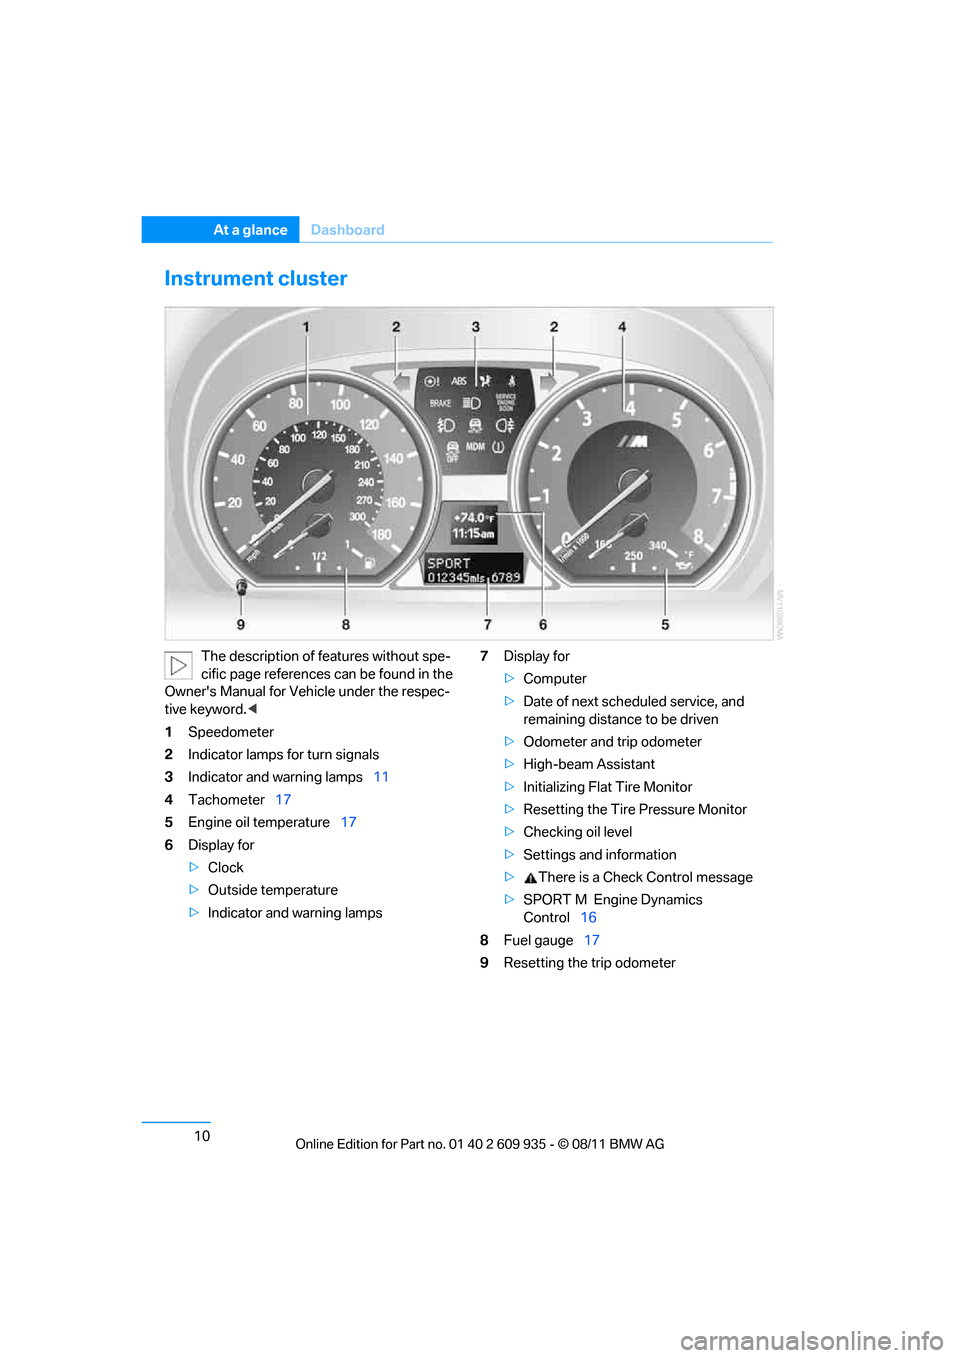 BMW 1M 2011 E82 User Guide 10
At a glanceDashboard
Instrument cluster
The description of features without spe-
cific page references can be found in the 
Owners Manual for Vehicle under the respec-
tive keyword. <
1 Speedomete